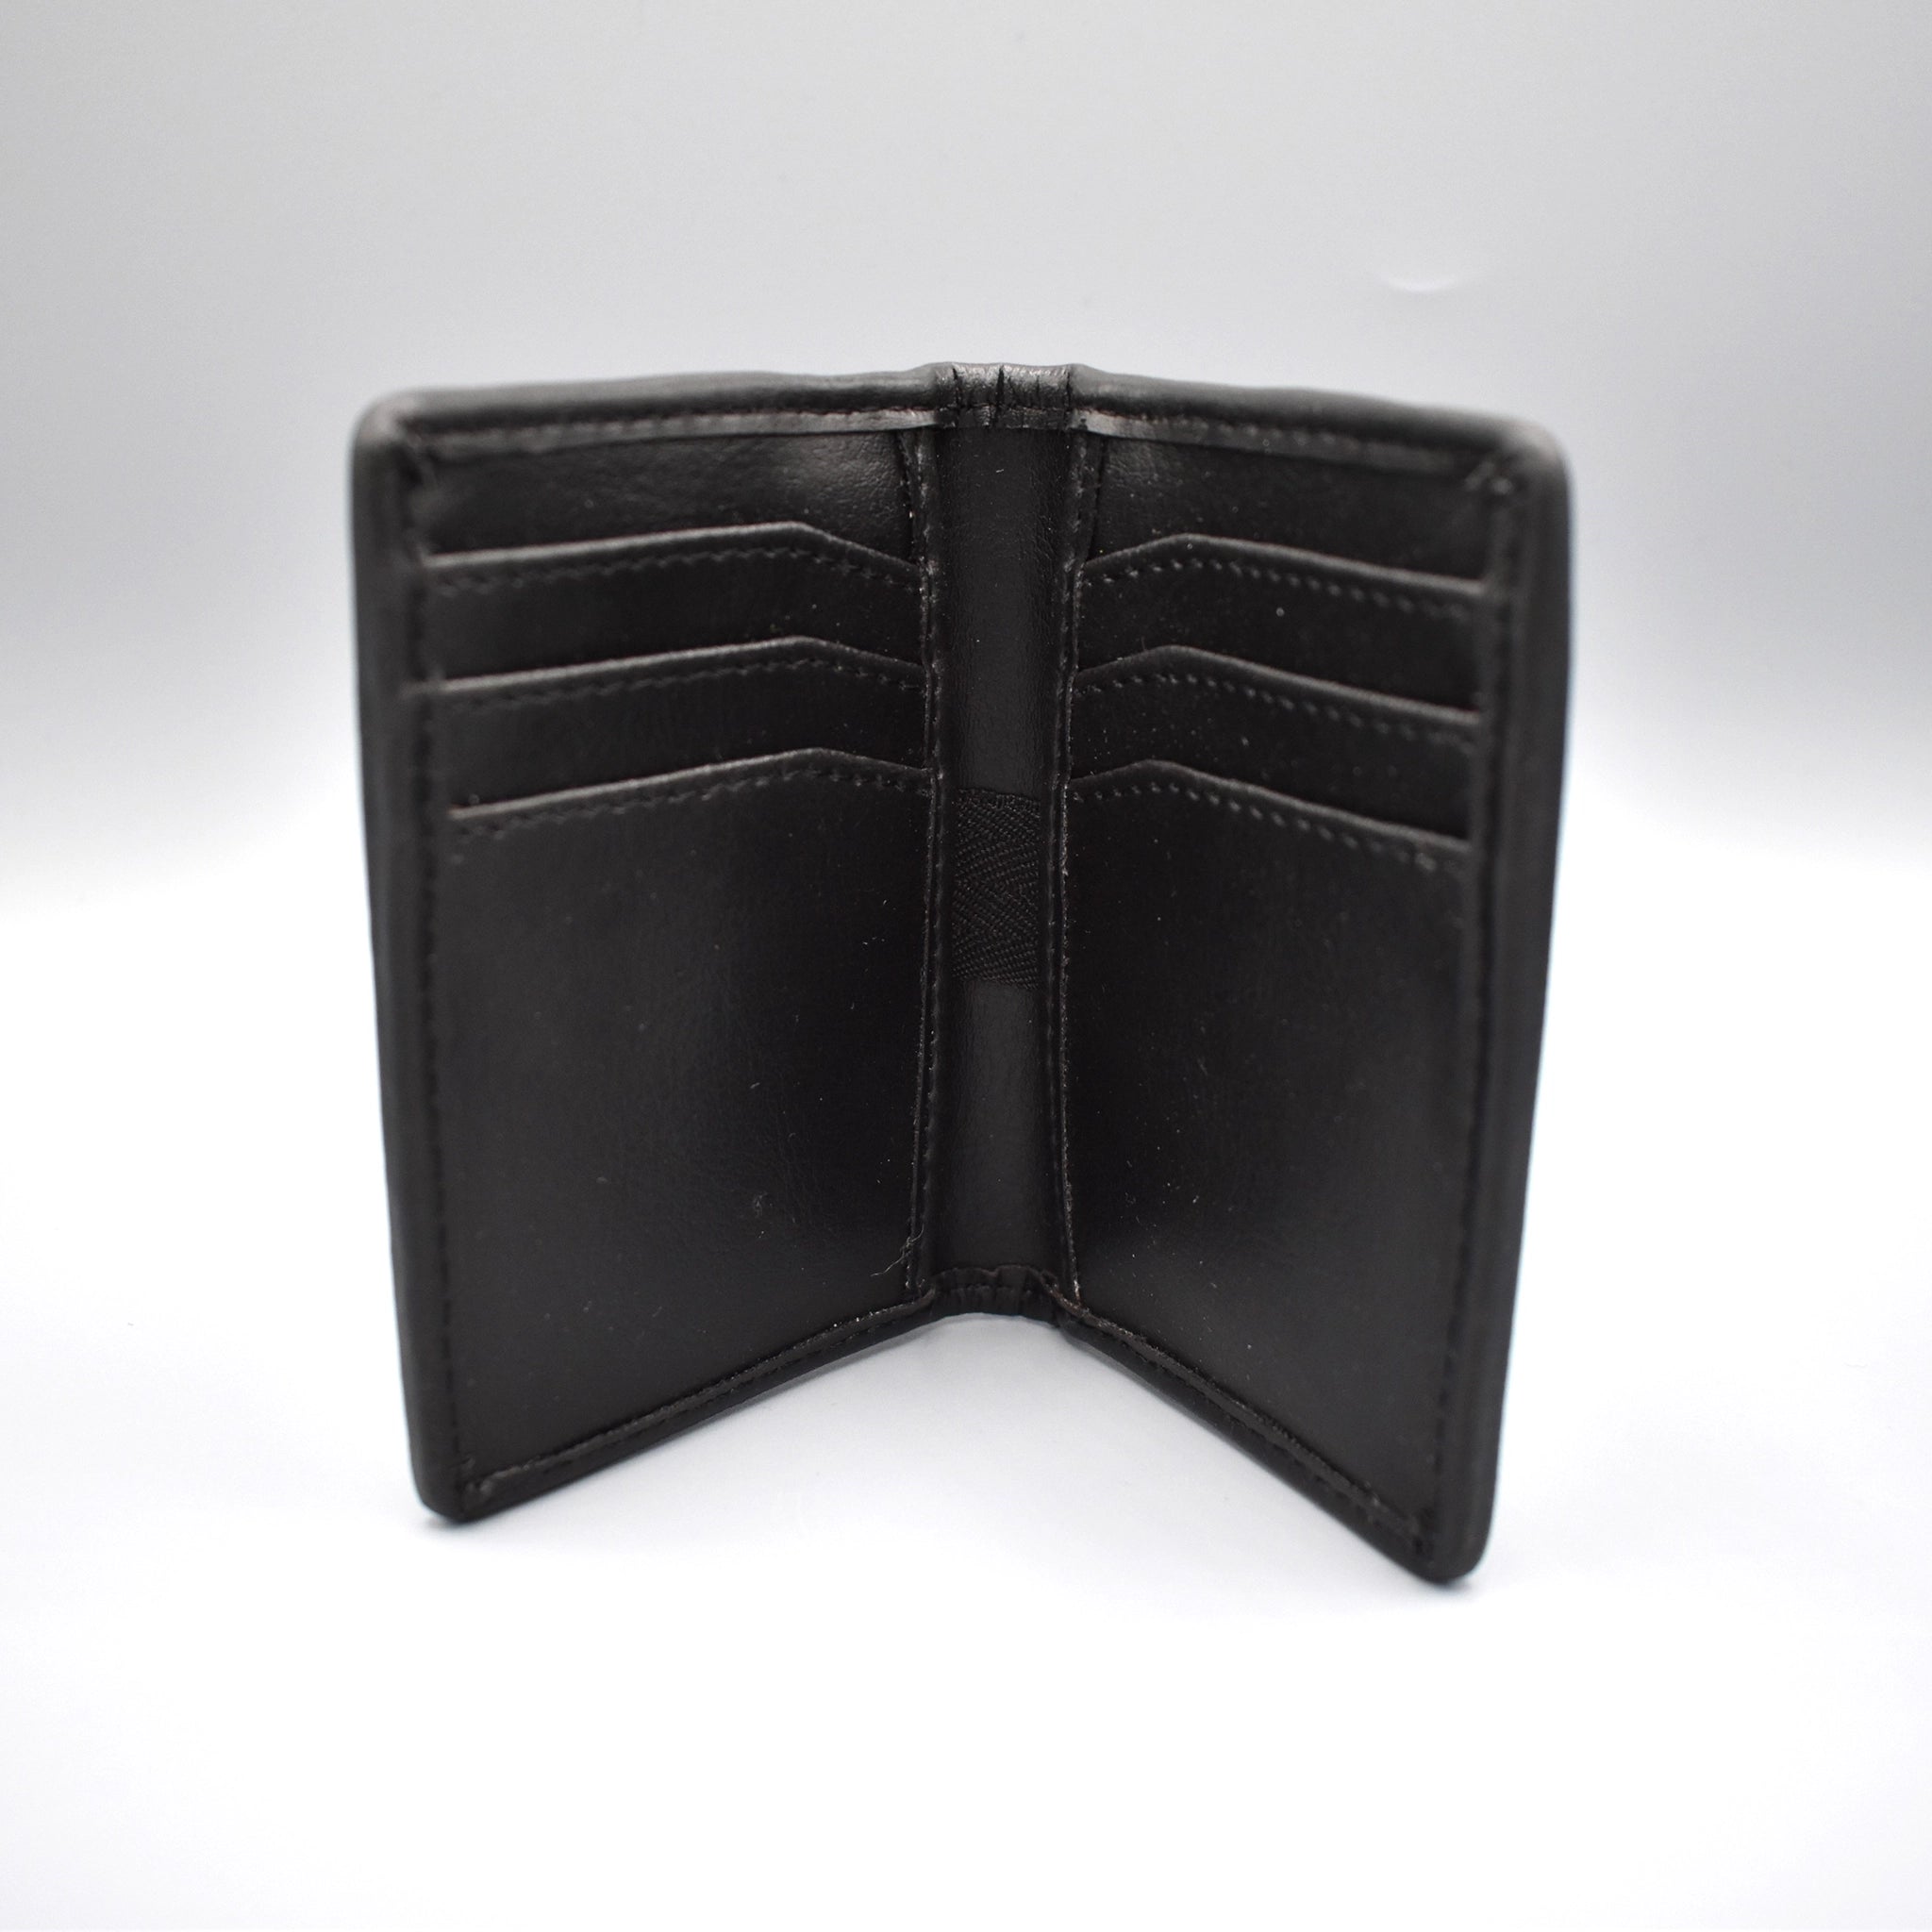 Inside of a charcoal faux leather card holder with 8 card slots